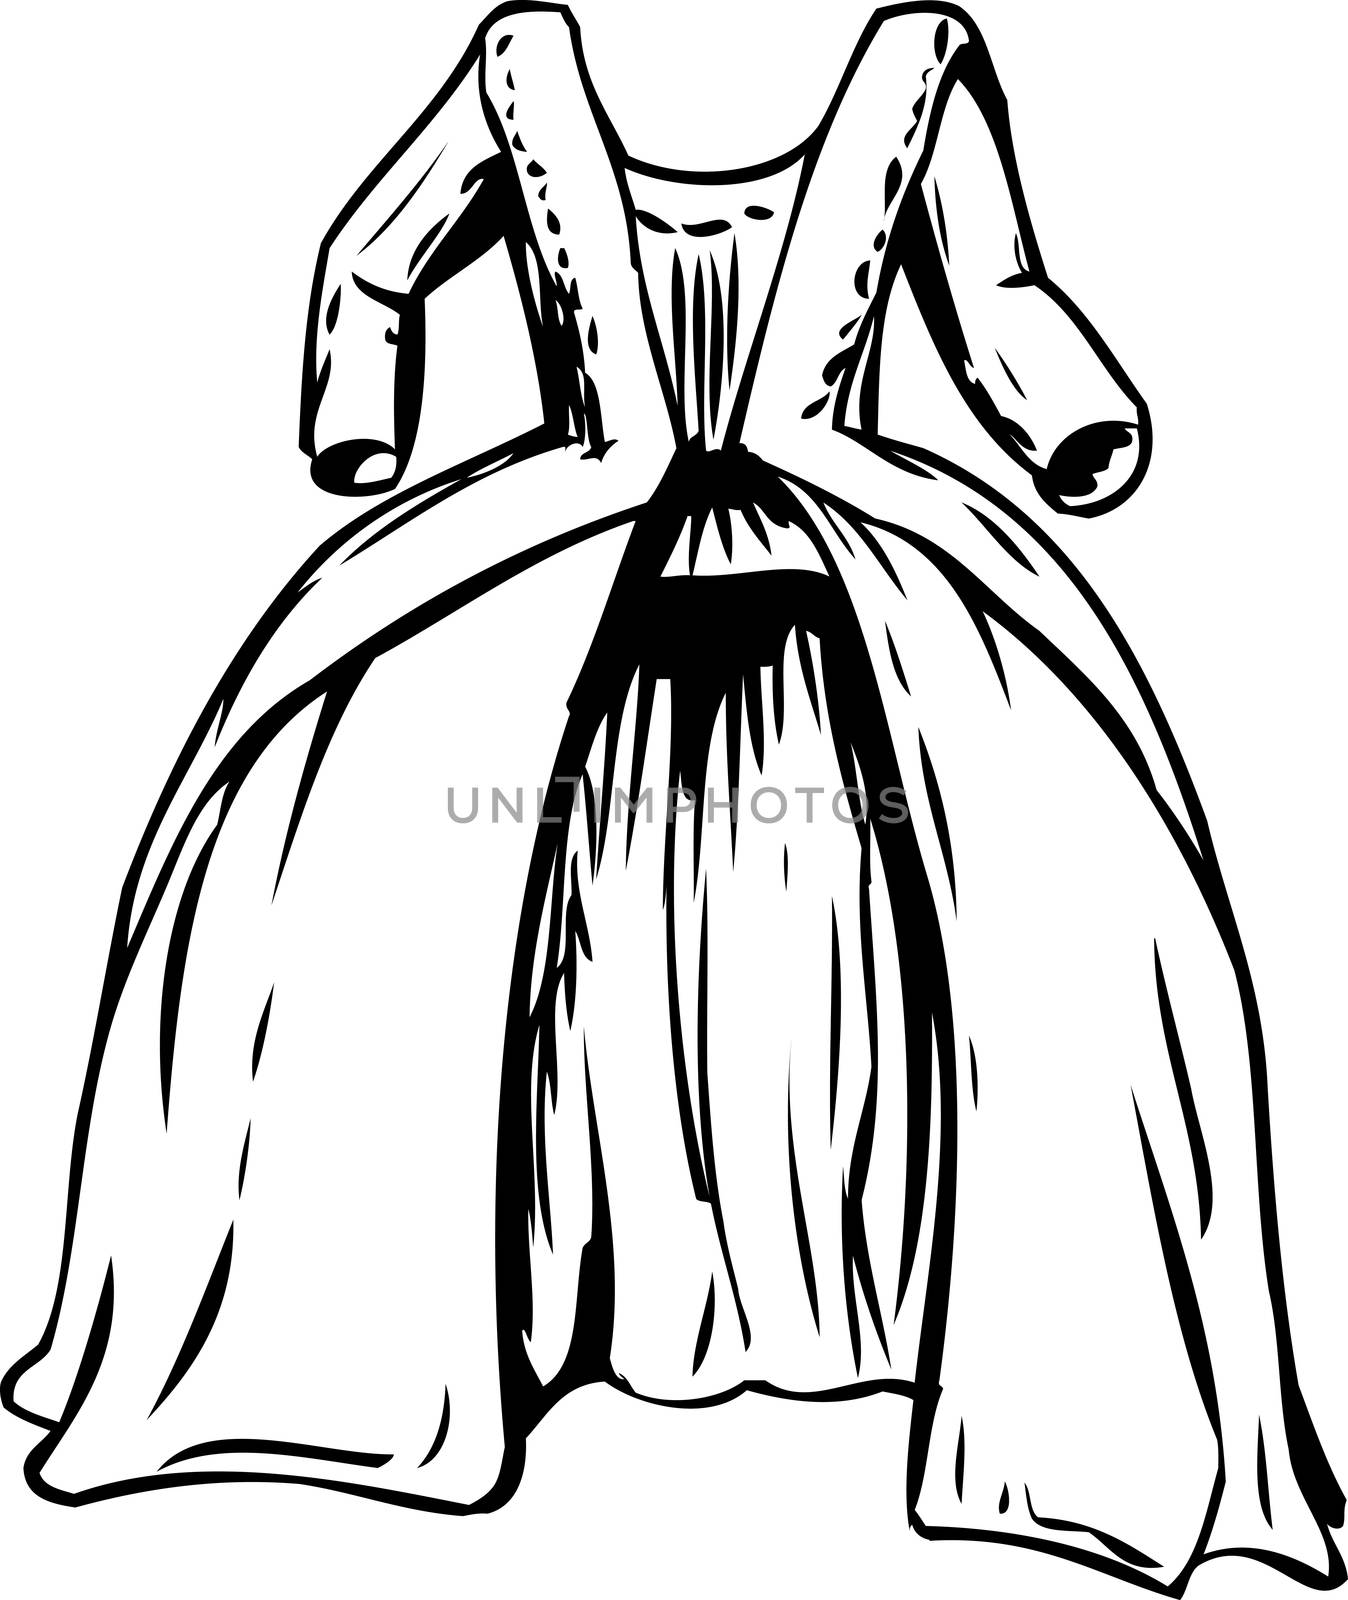 Outlined round gown or court dress from 18th century fashion